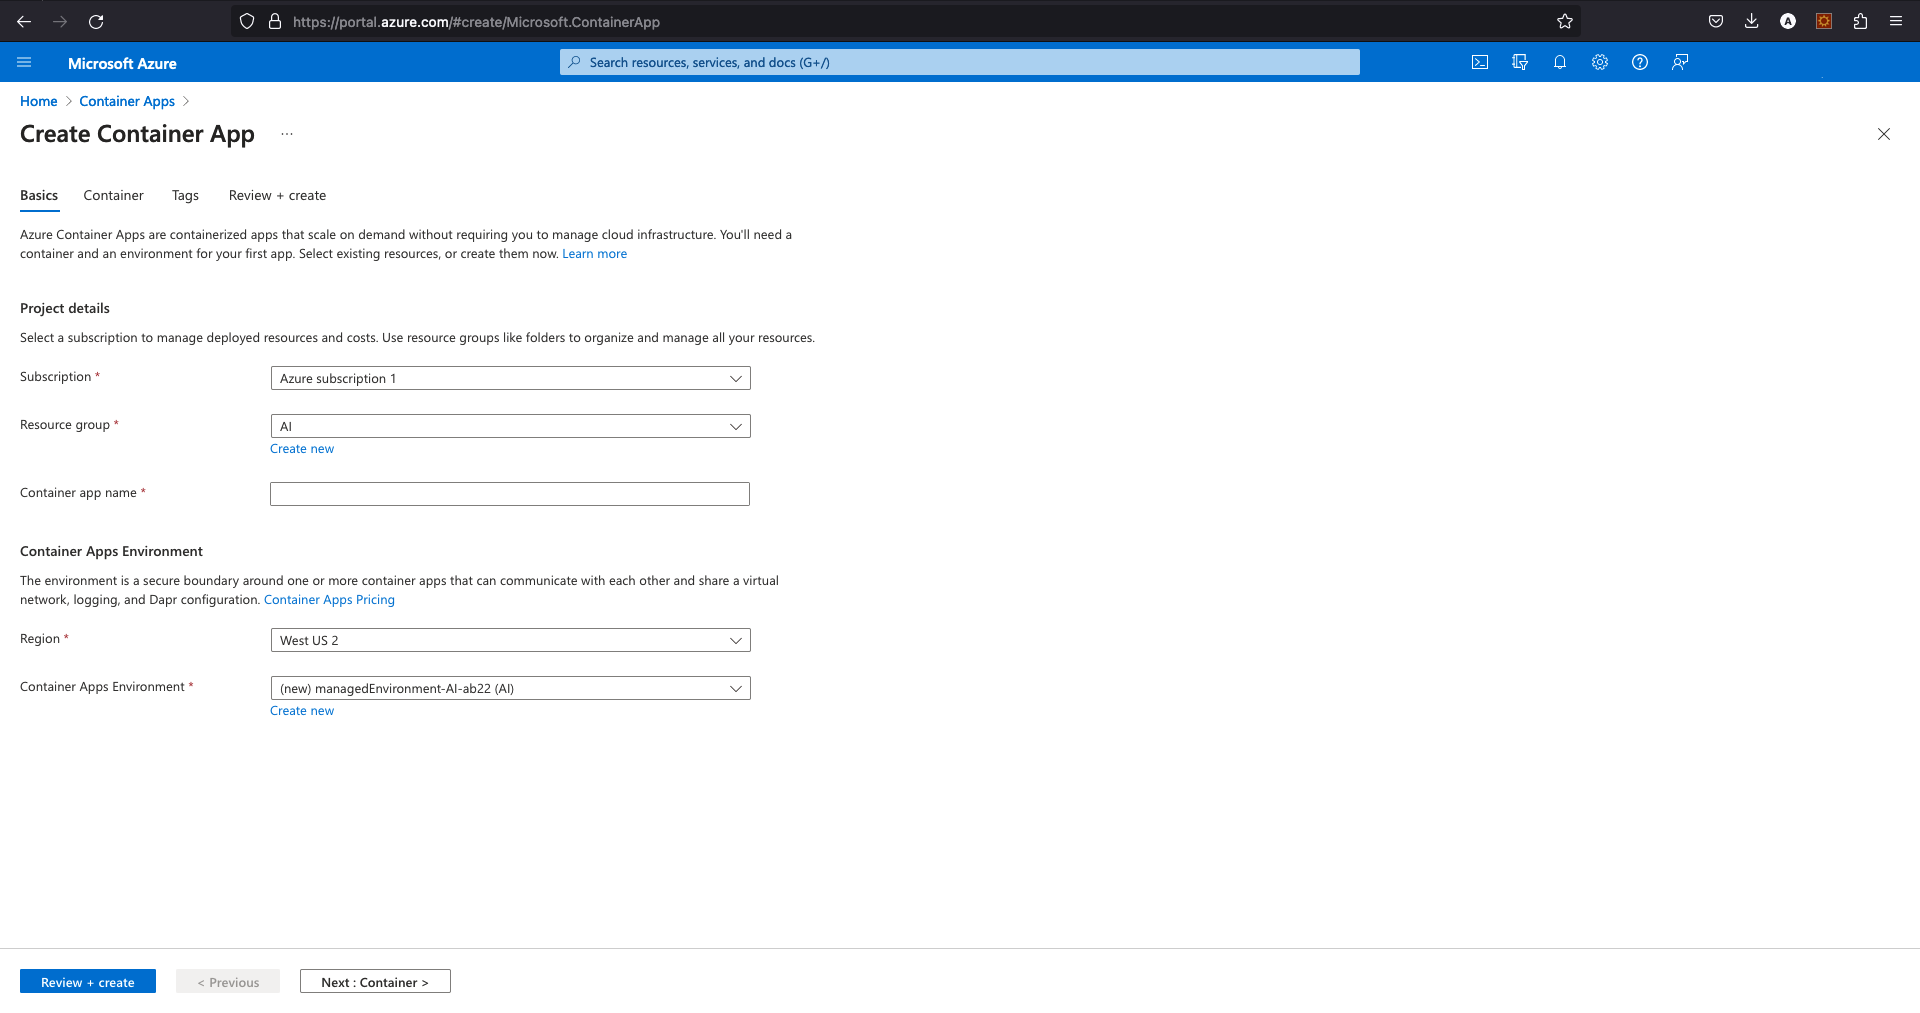 Deploying ToolJet on Azure container apps